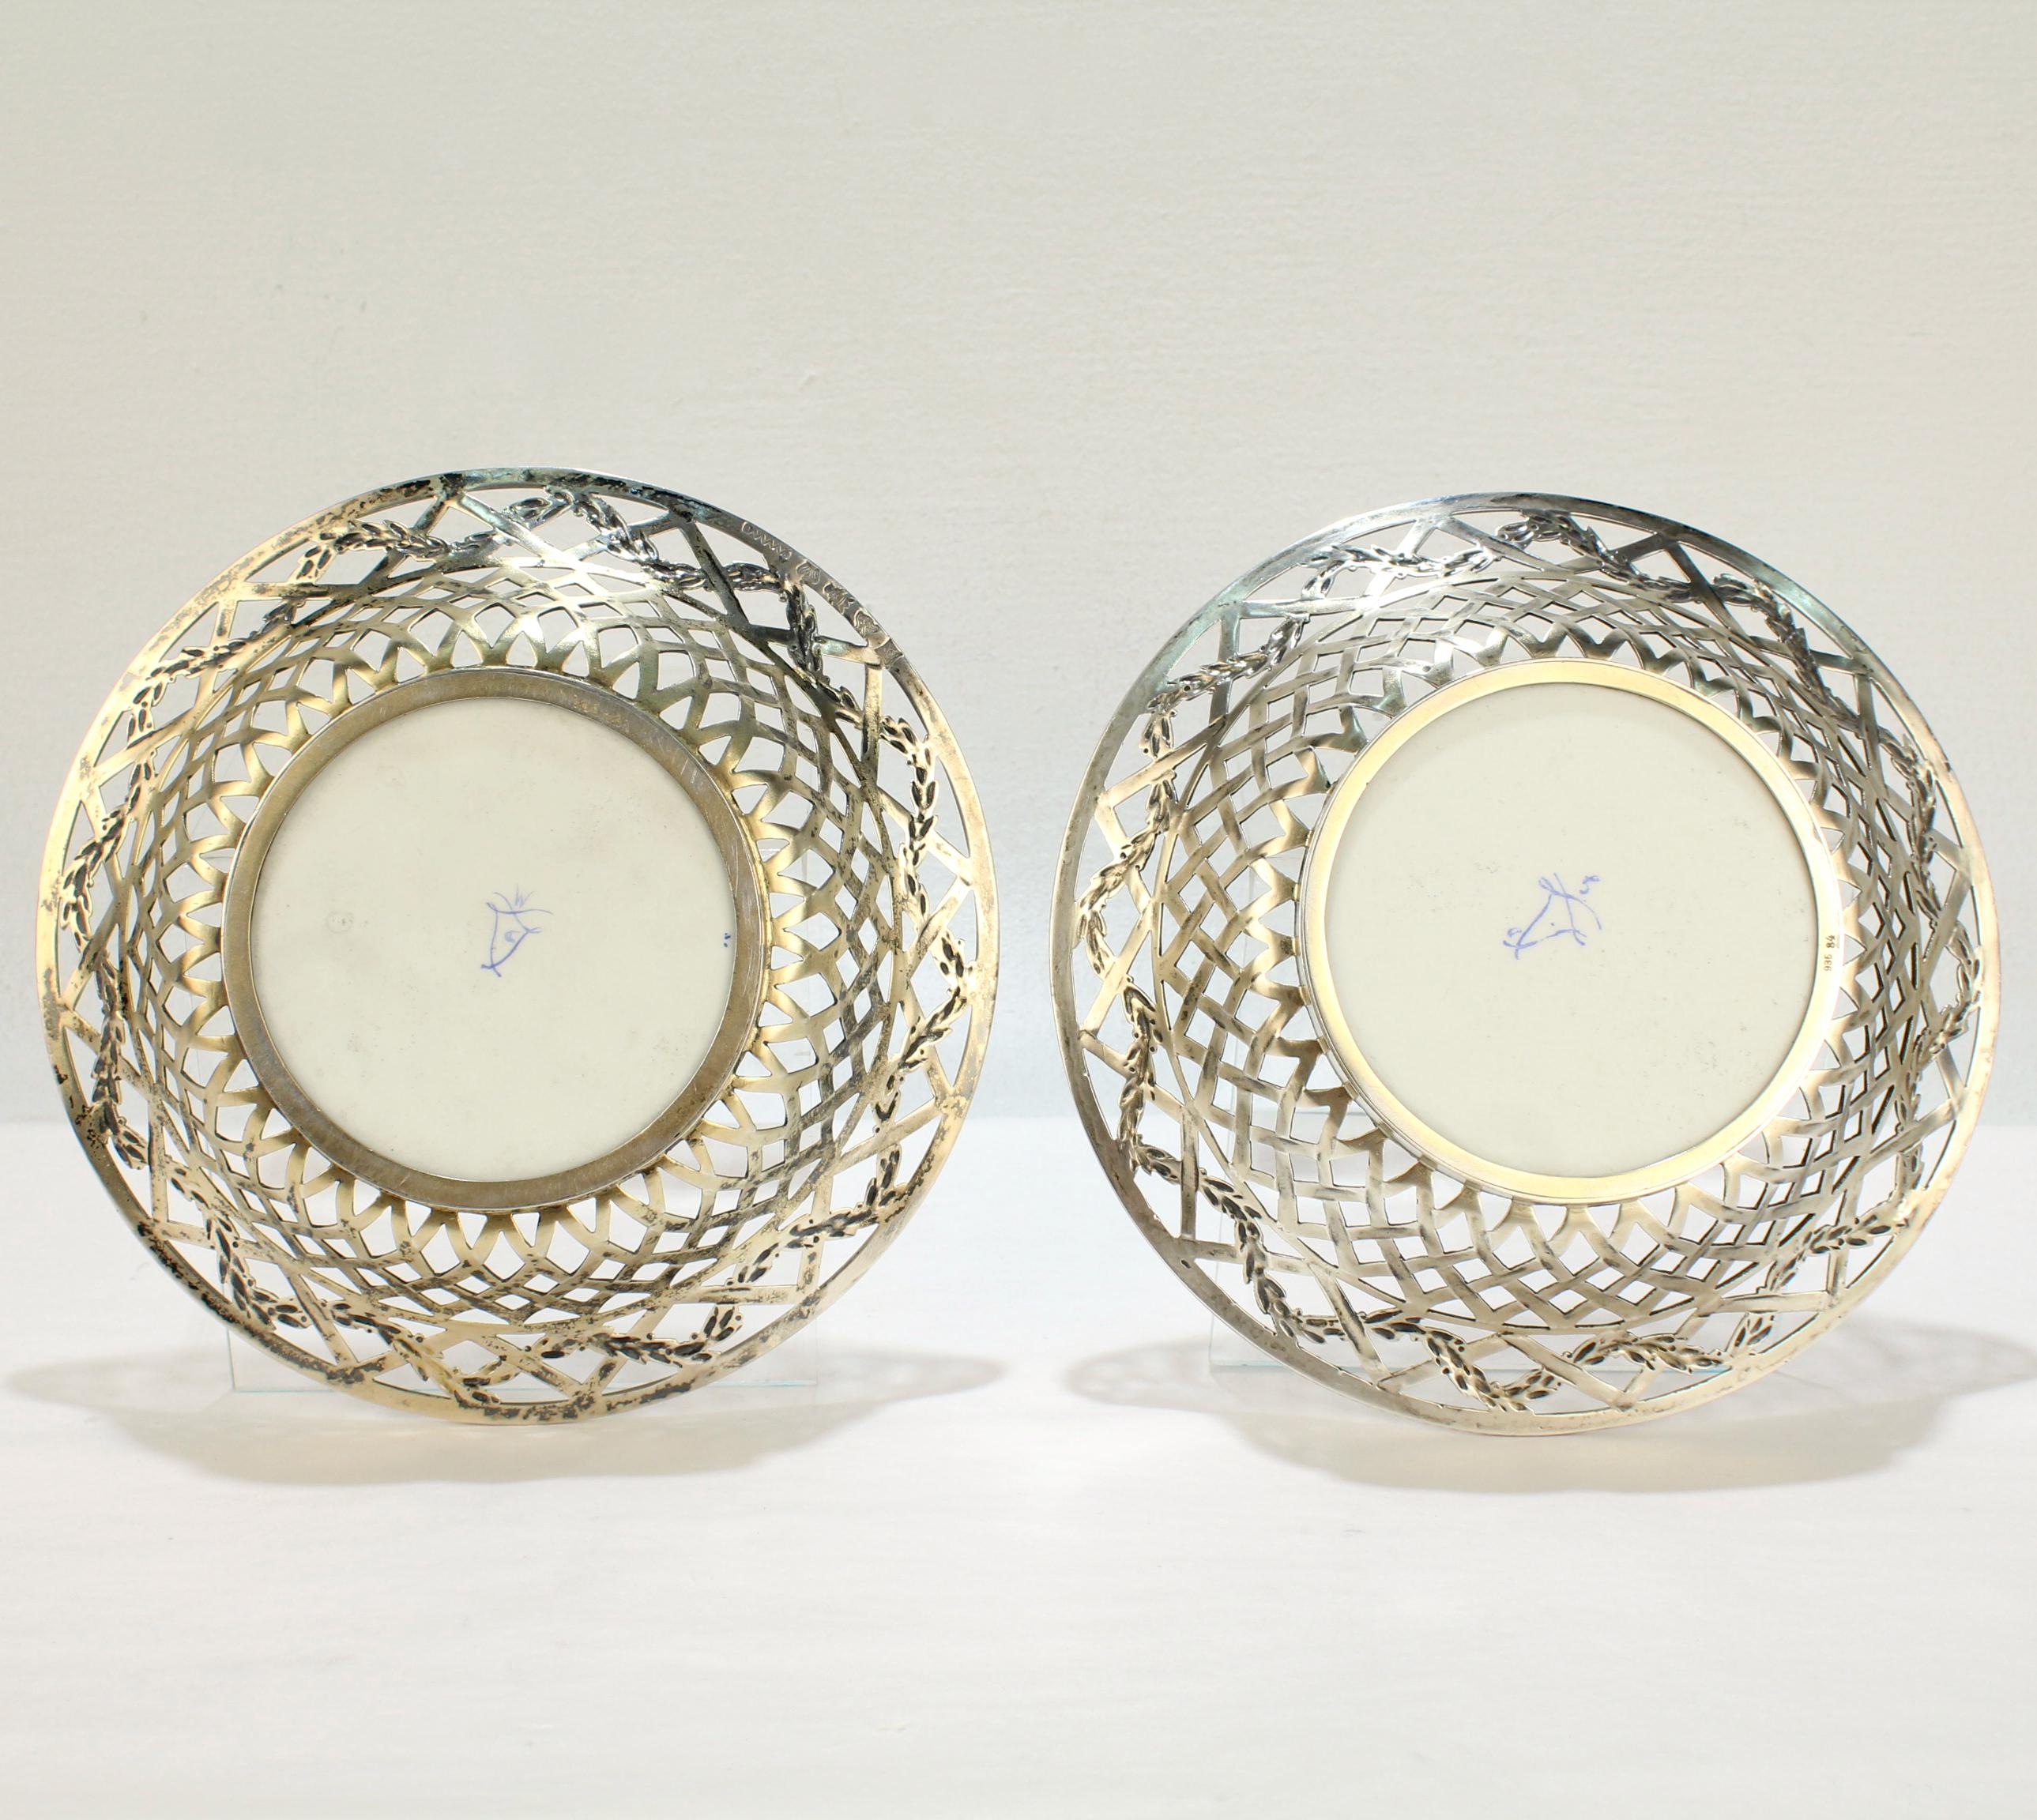 Pair of Antique Reticulated Sterling Silver Bowls with Sevres Porcelain Plaques For Sale 5